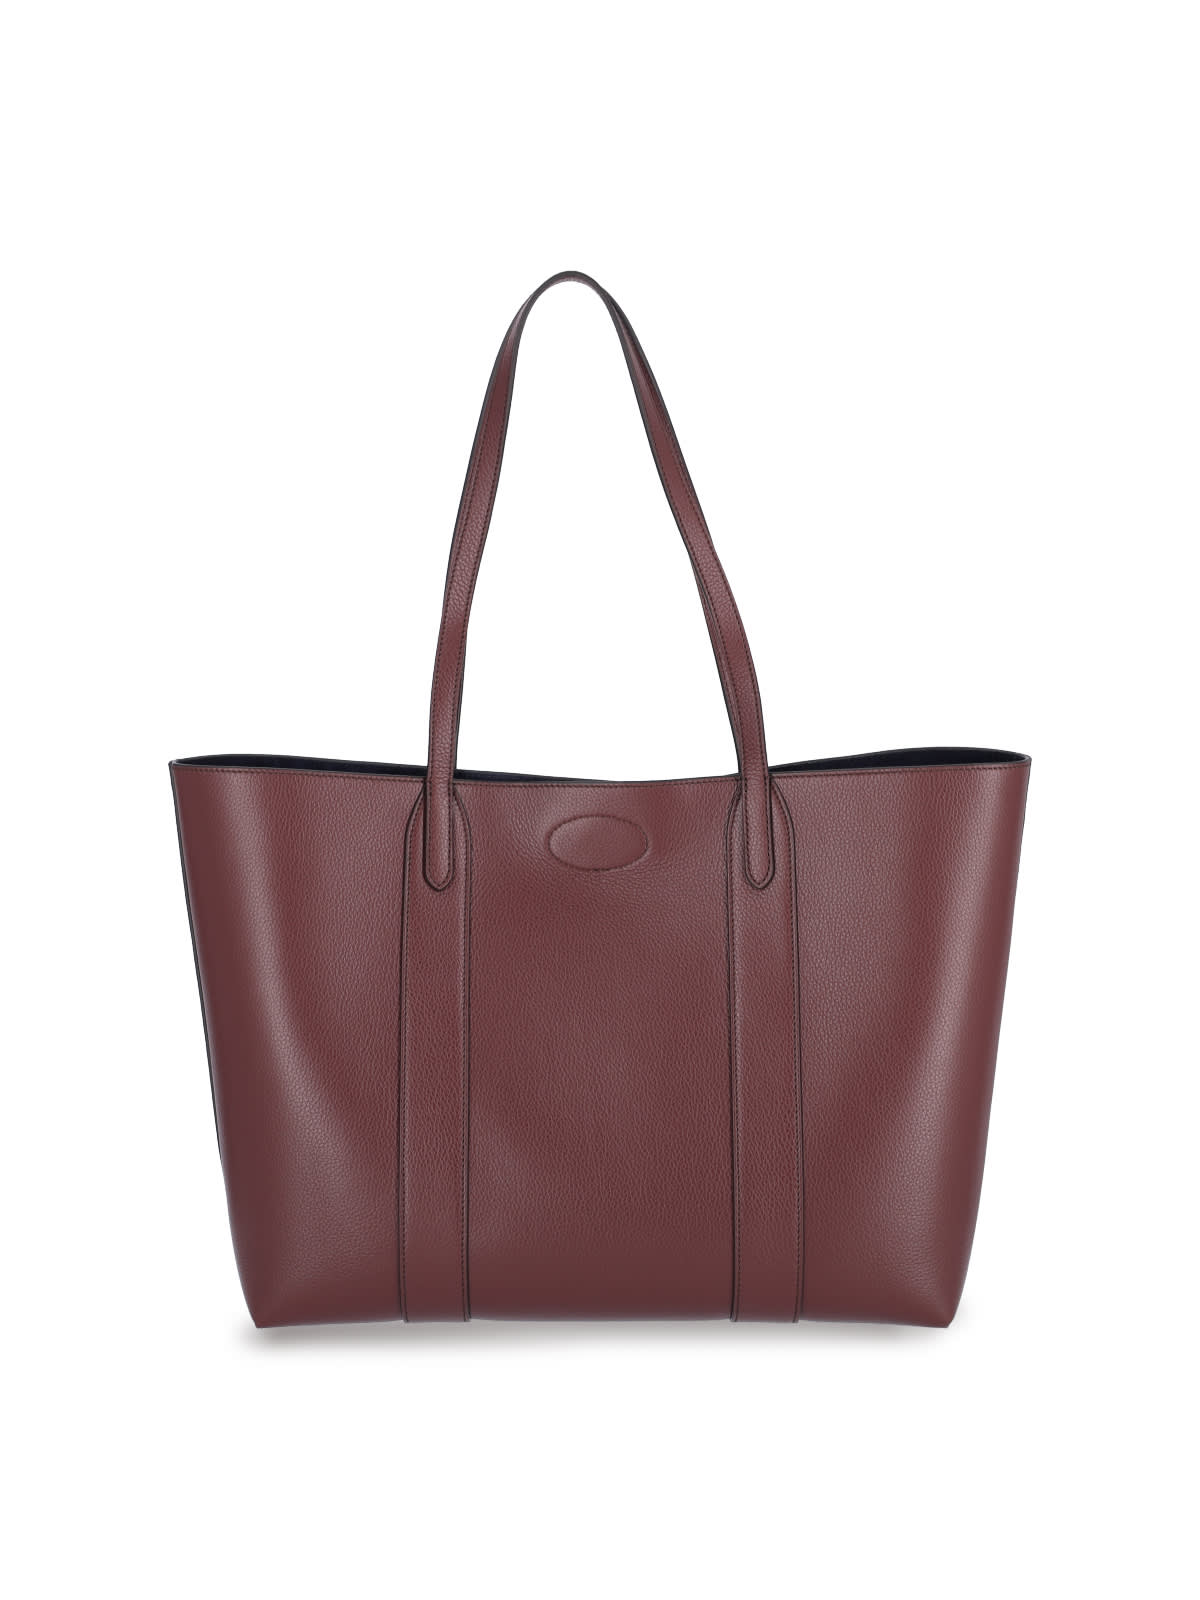 MULBERRY TOTE 